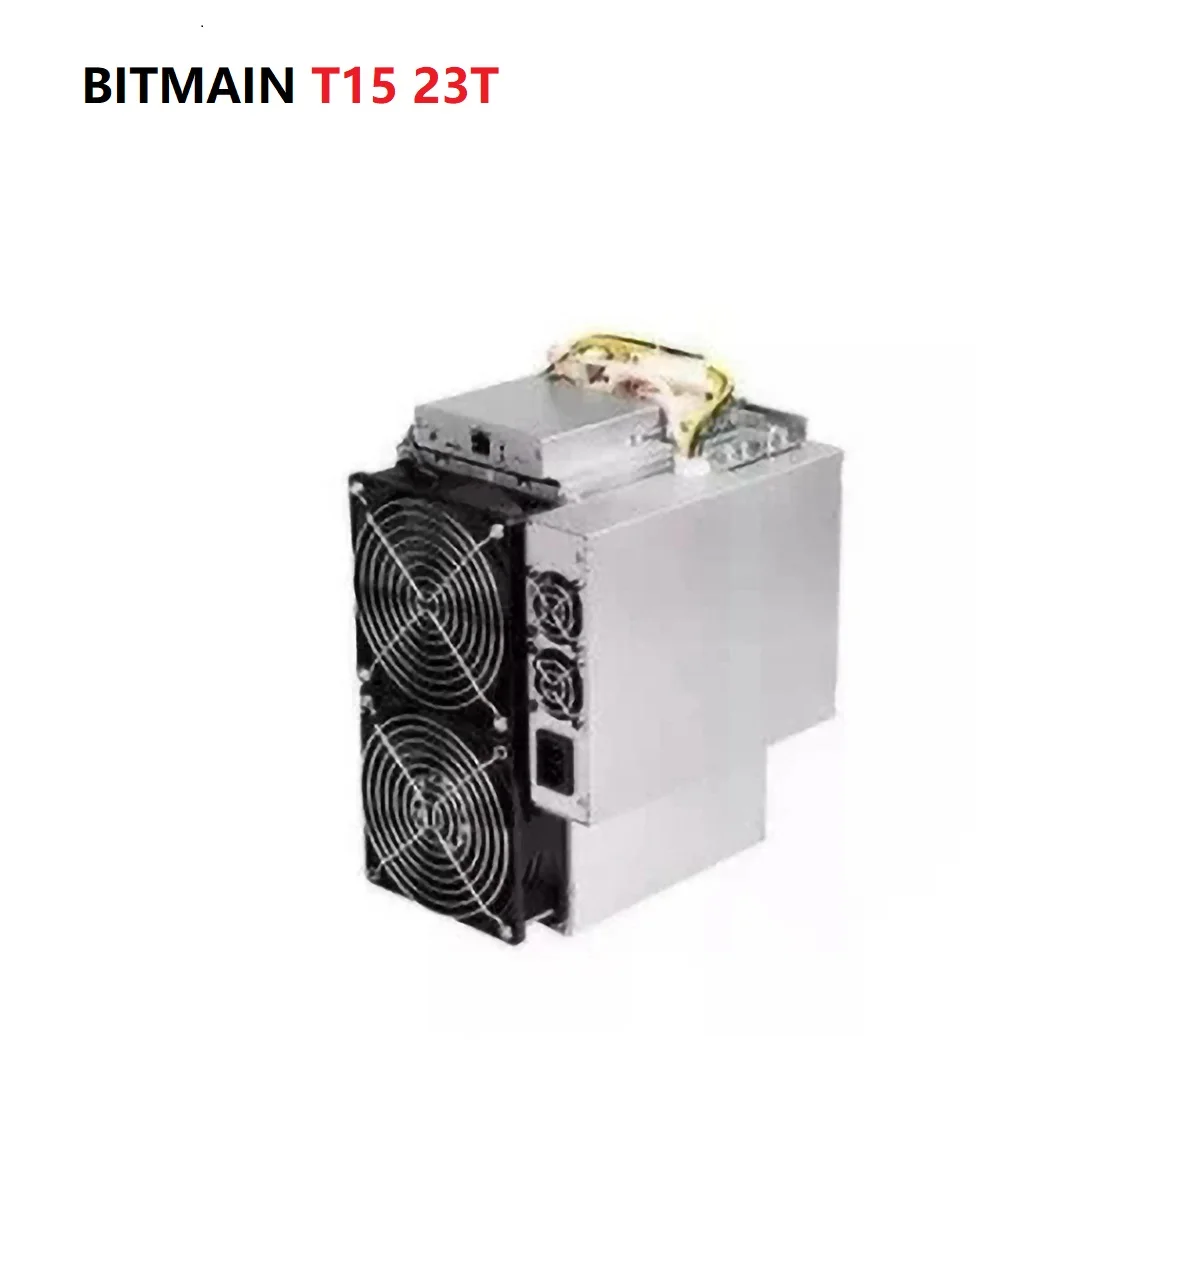 

Refurbished & Used Bitcoin Miner AntMiner T15 23T with PSU good for Free electricity Solar Power BTC Mining